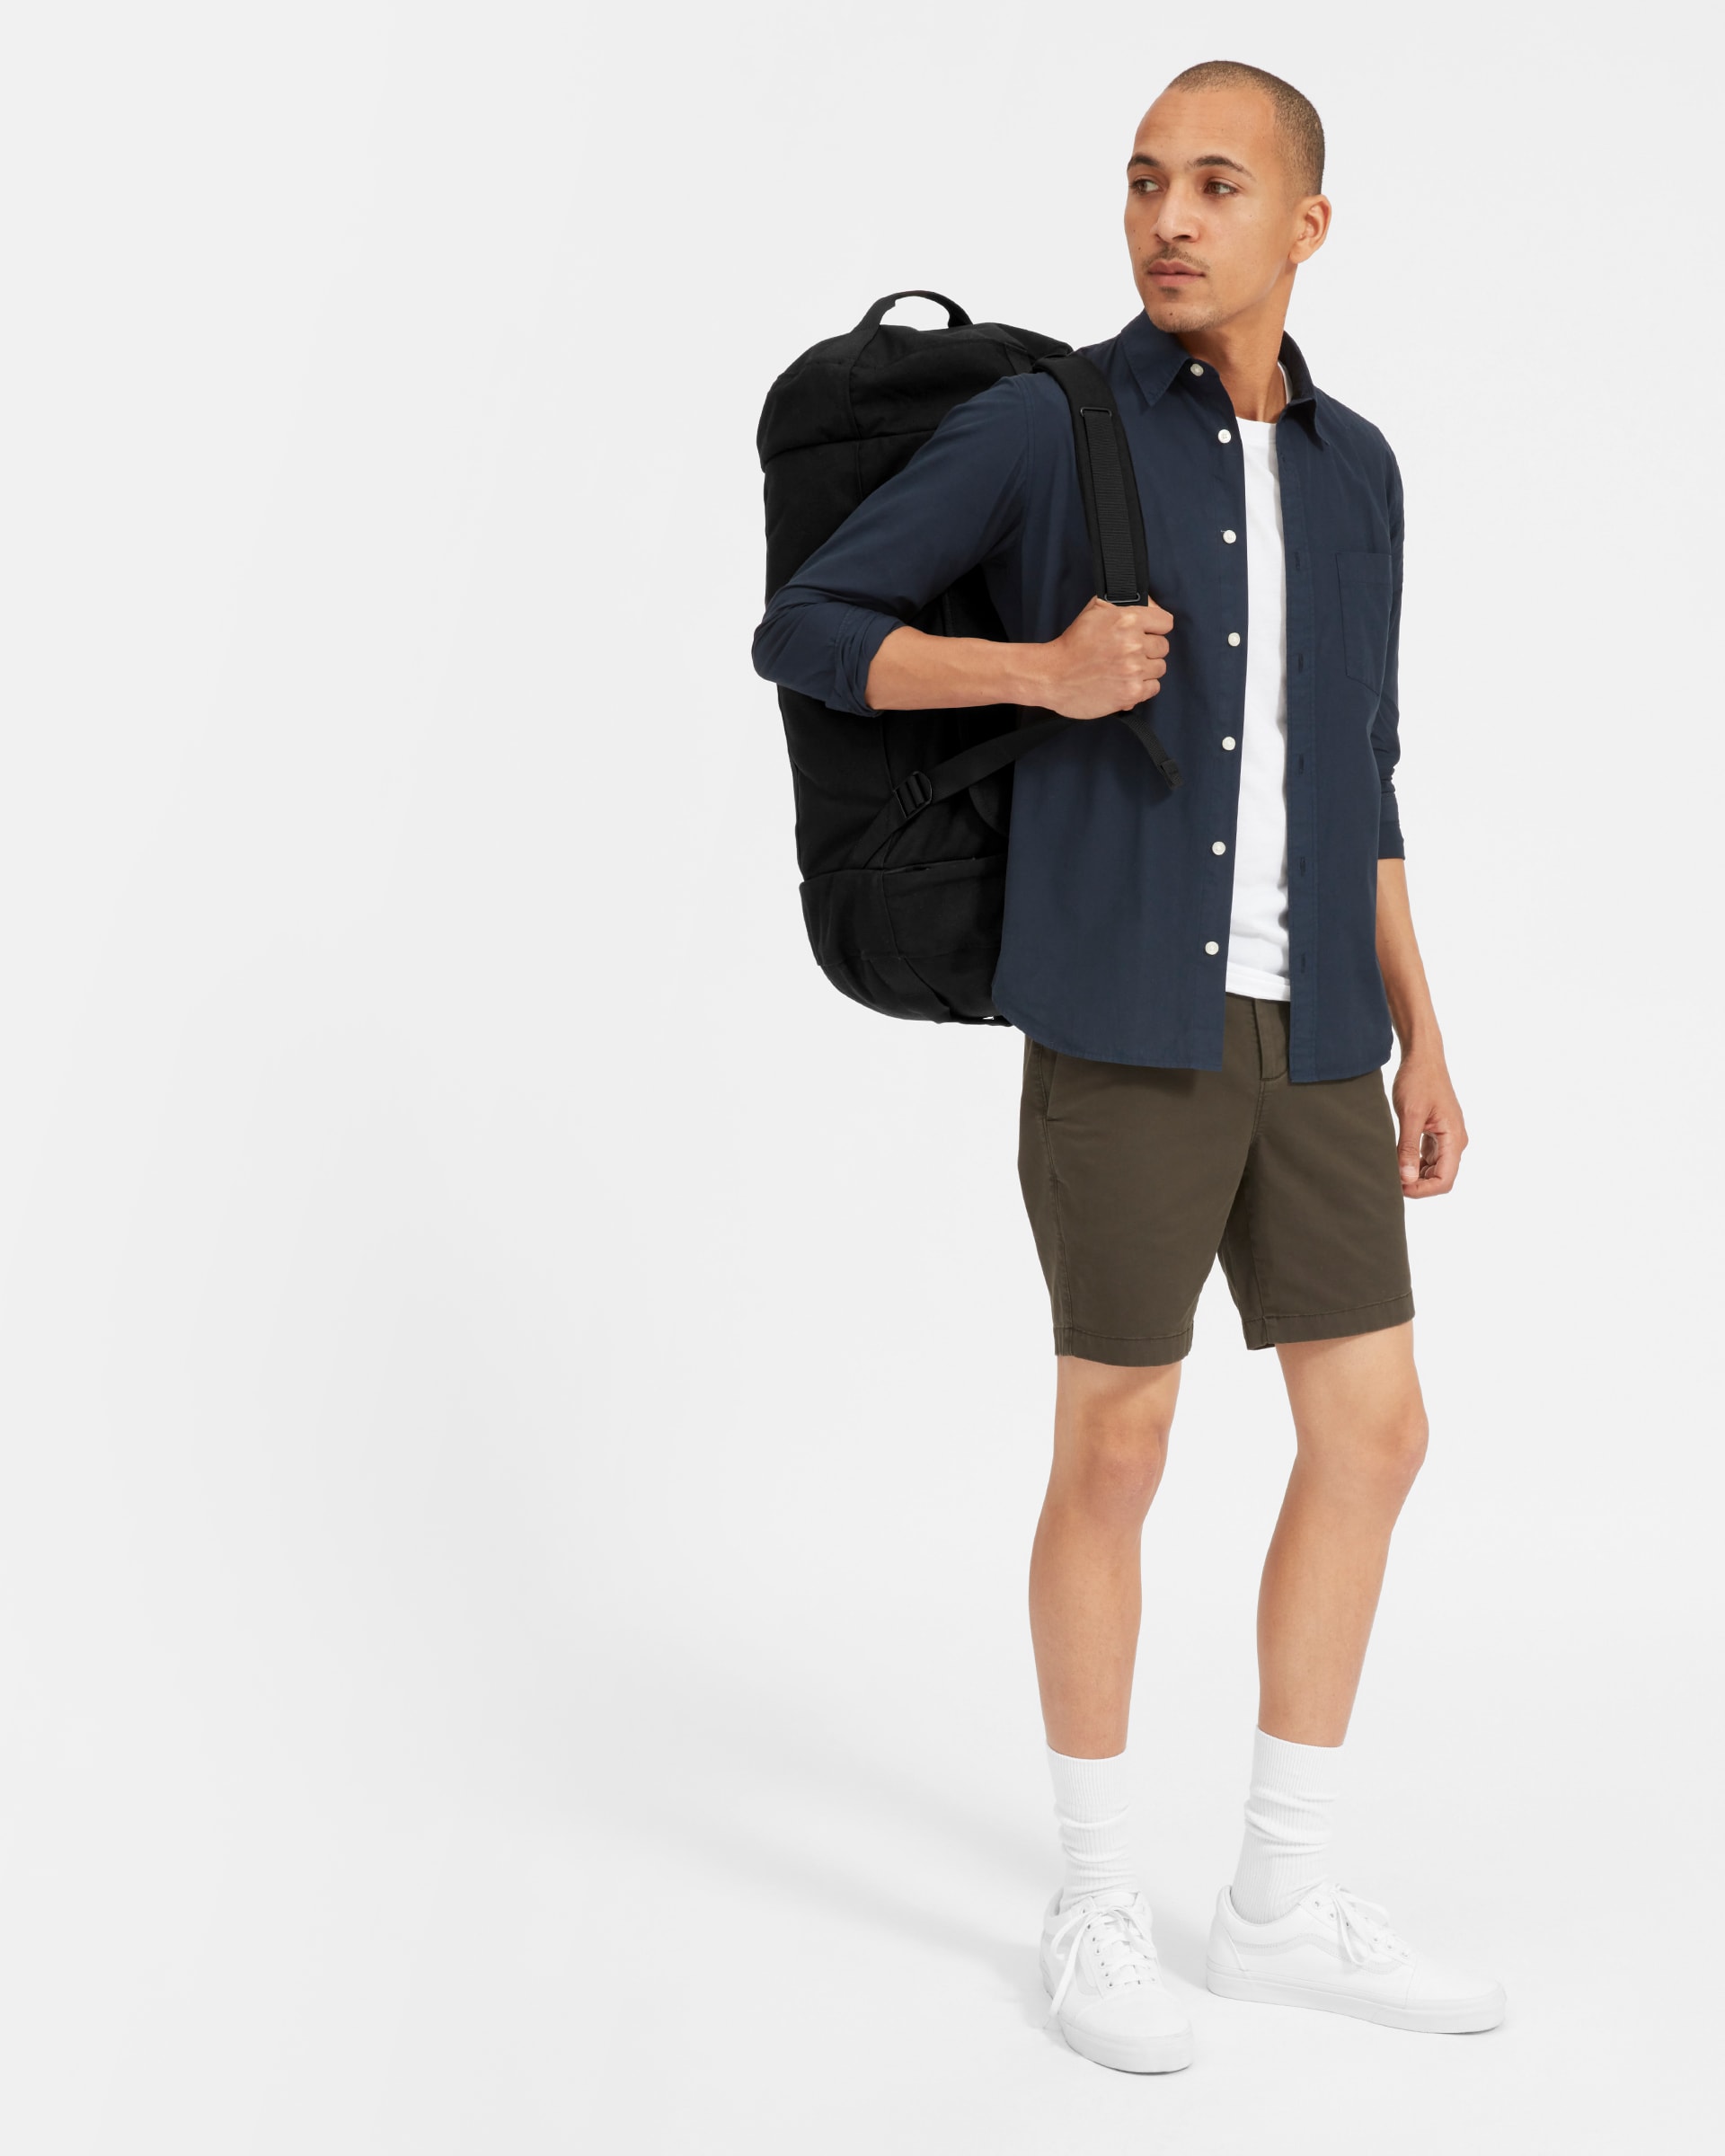 The Mover Pack Black – Everlane